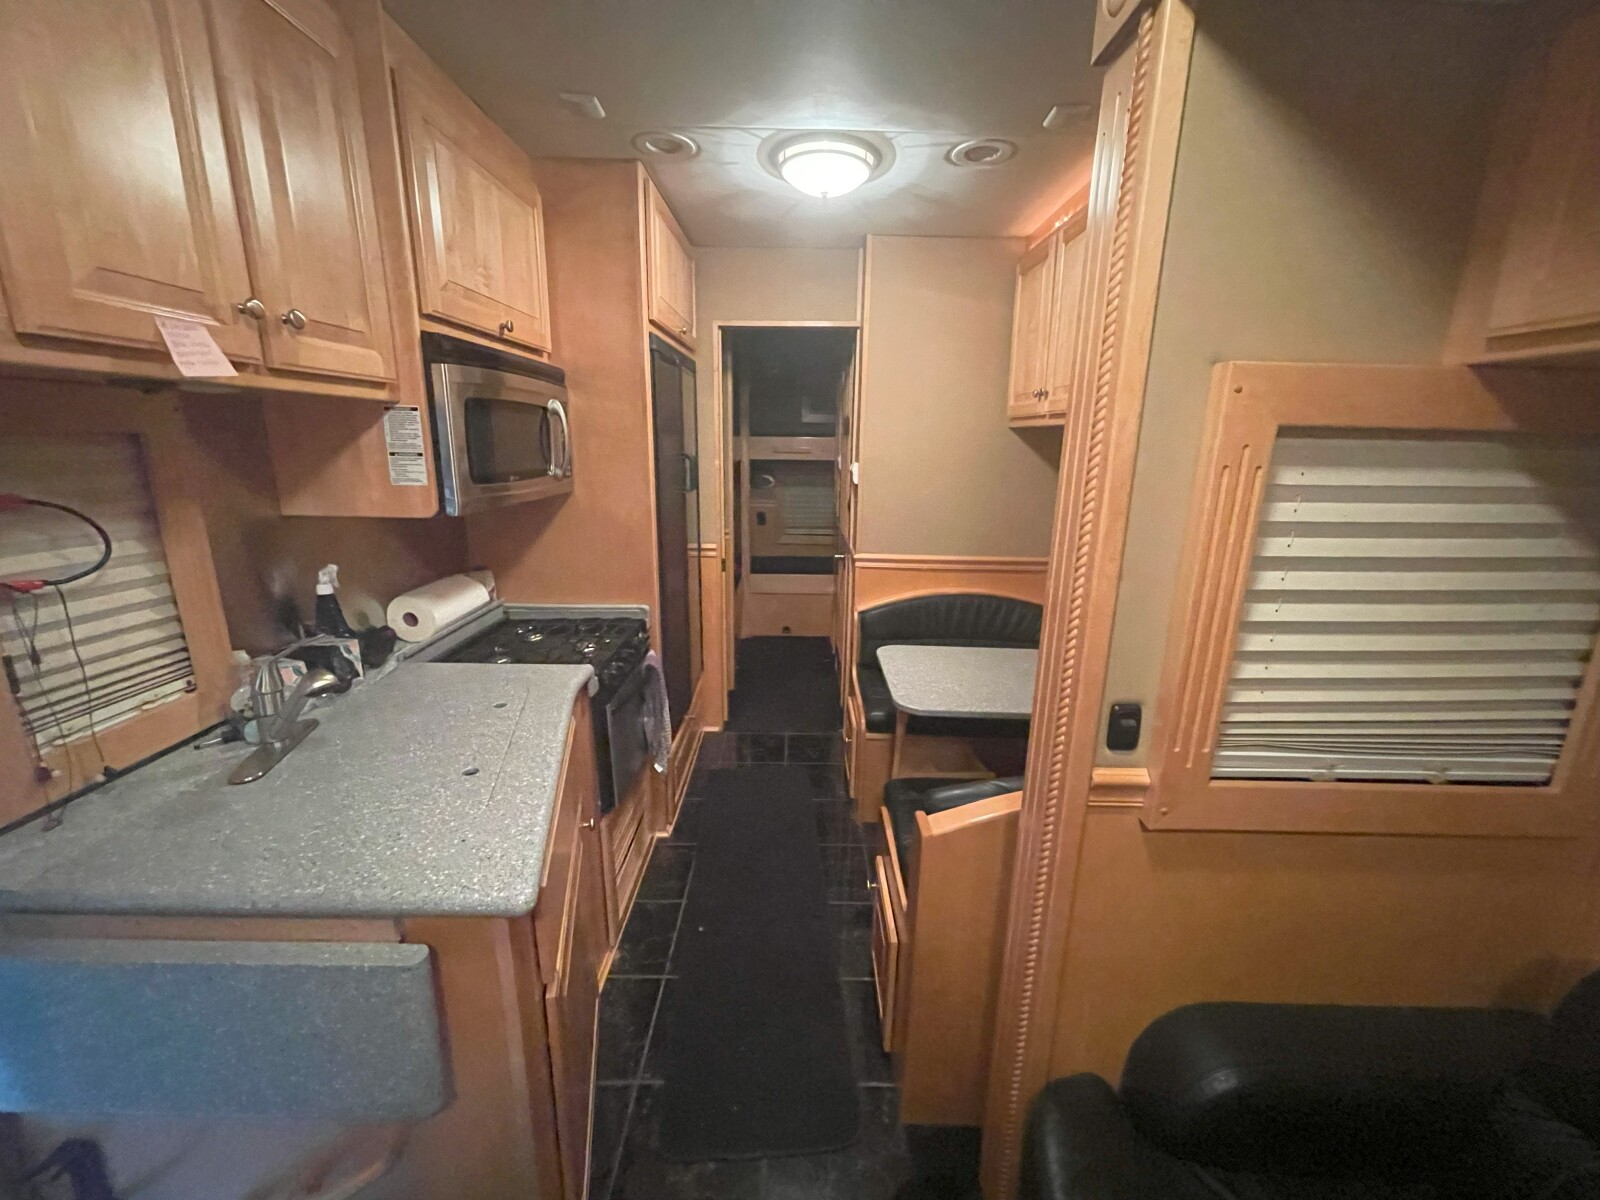 For Sale: 2006 Freightliner Toter Home & 2005 Renegade Trailer - photo17